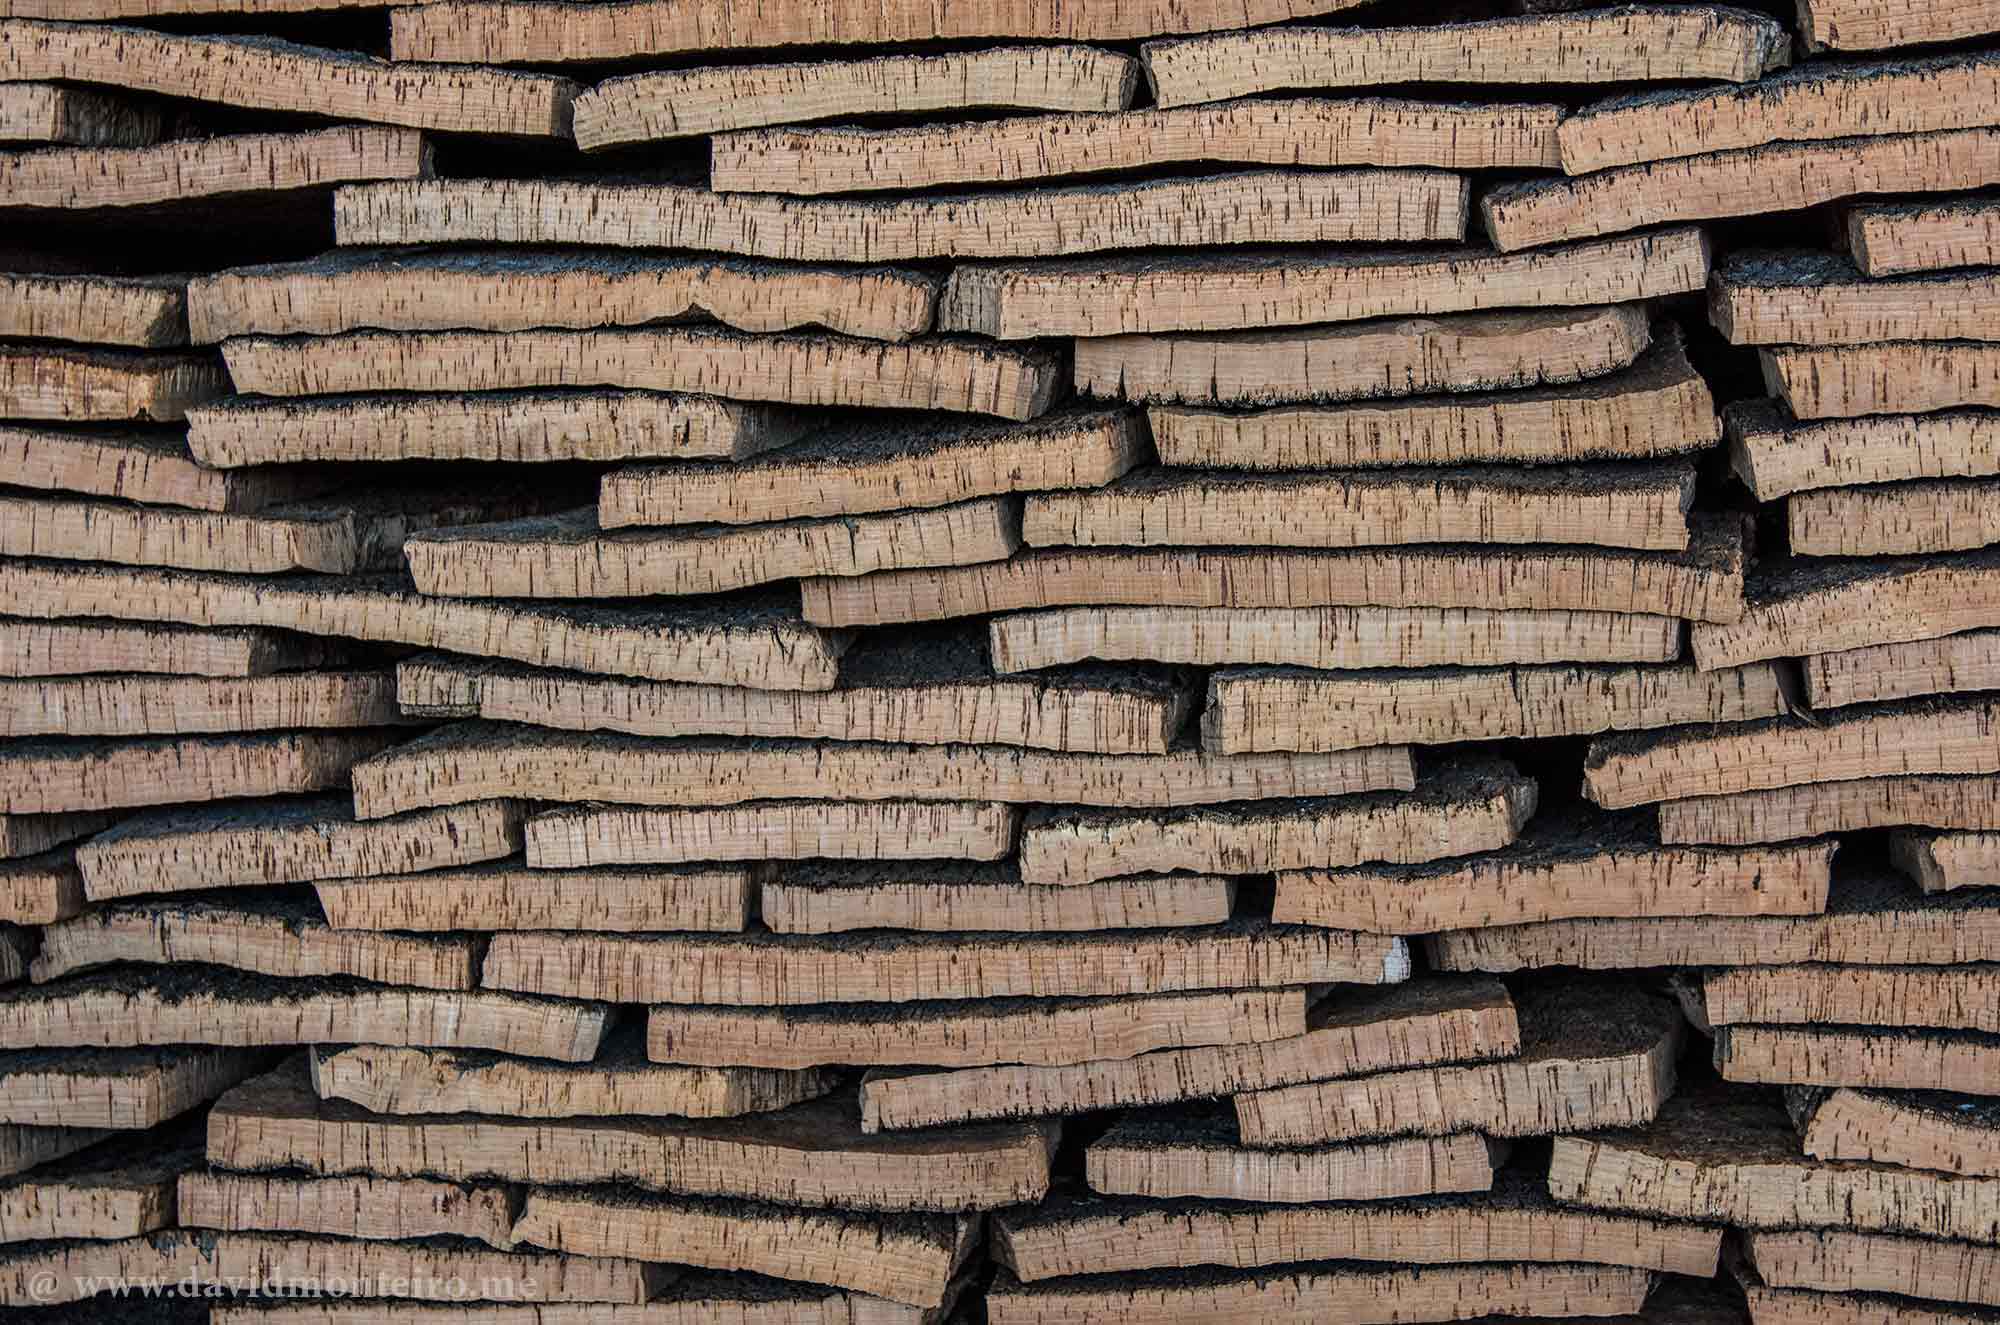 Cork piles from Portugal.